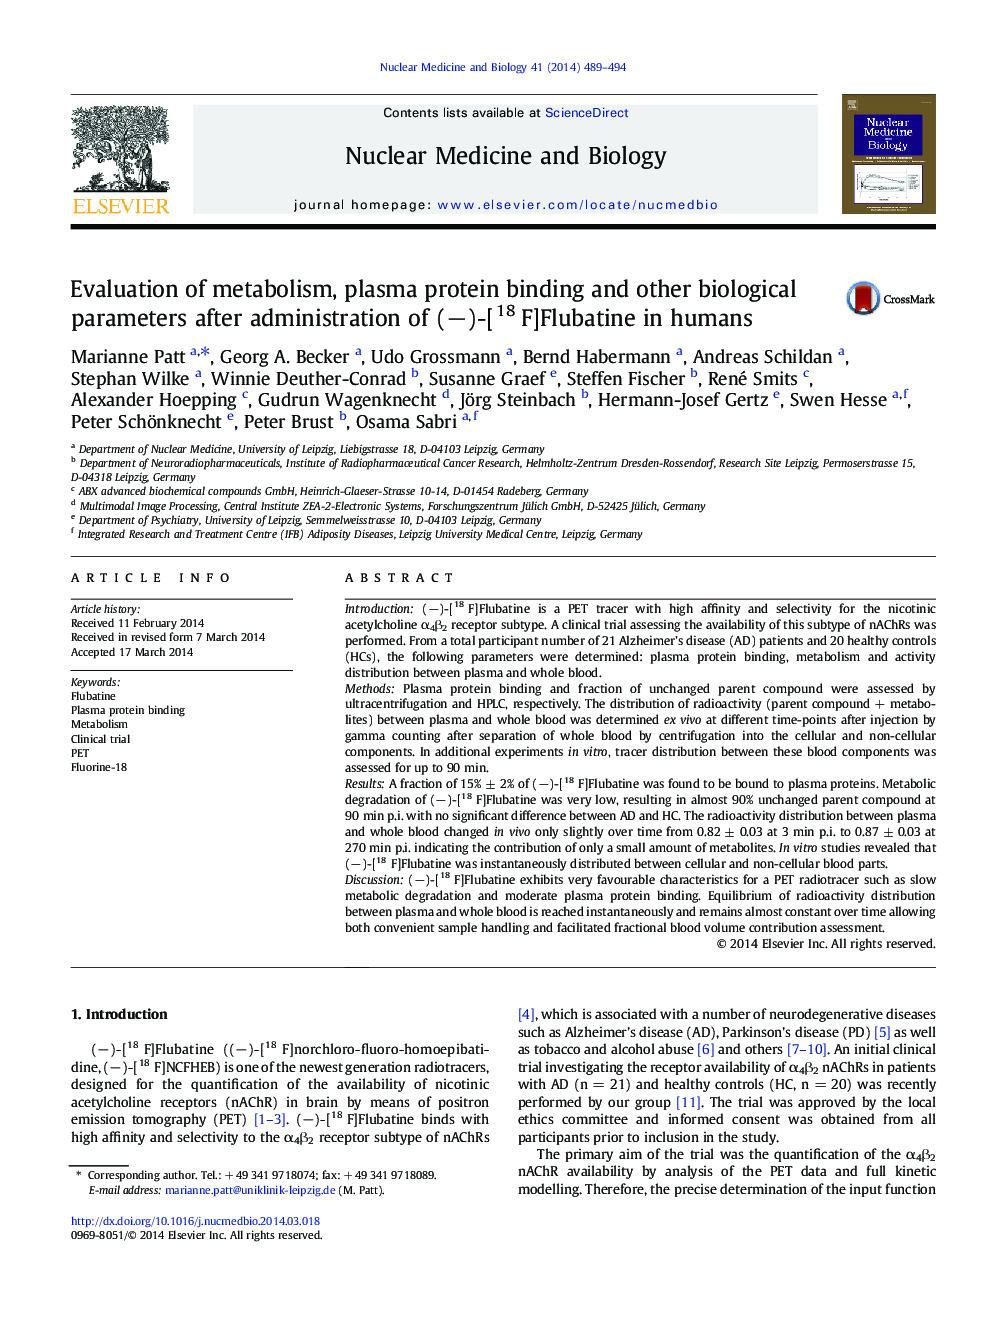 Evaluation of metabolism, plasma protein binding and other biological parameters after administration of (−)-[18 F]Flubatine in humans